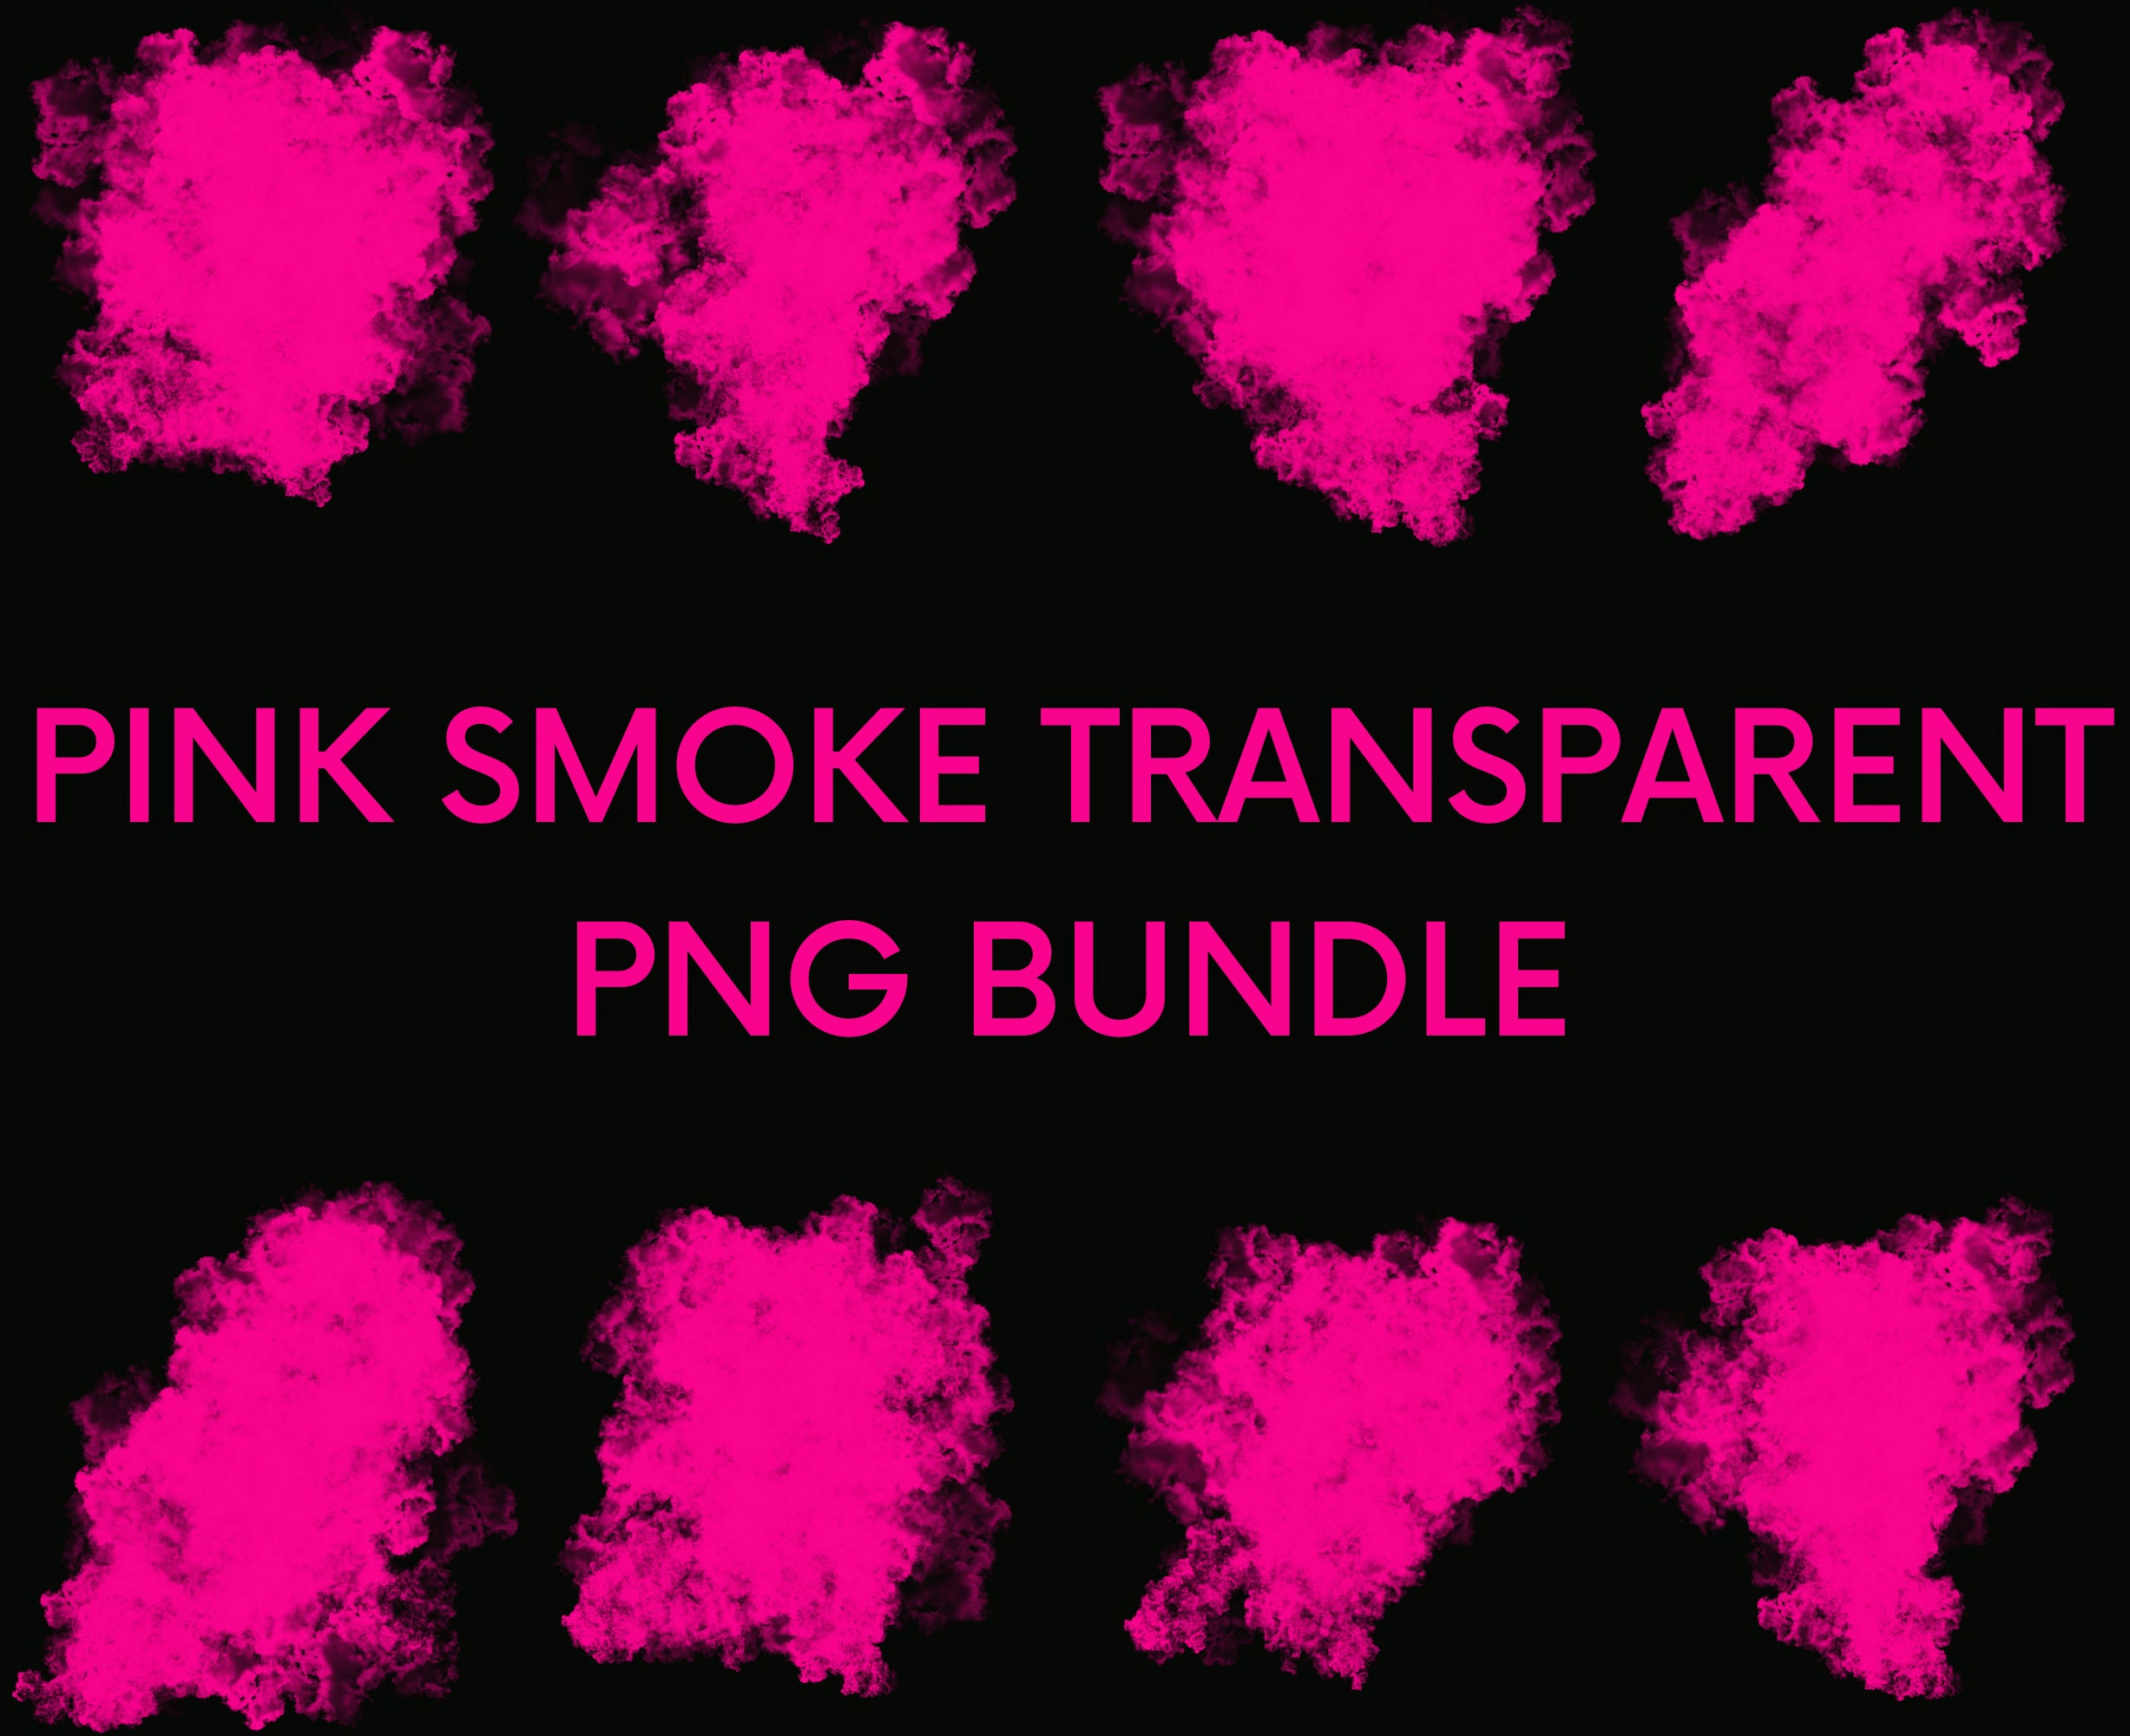 Pink and Blue Smoke Bombs Overlays - Design Cuts